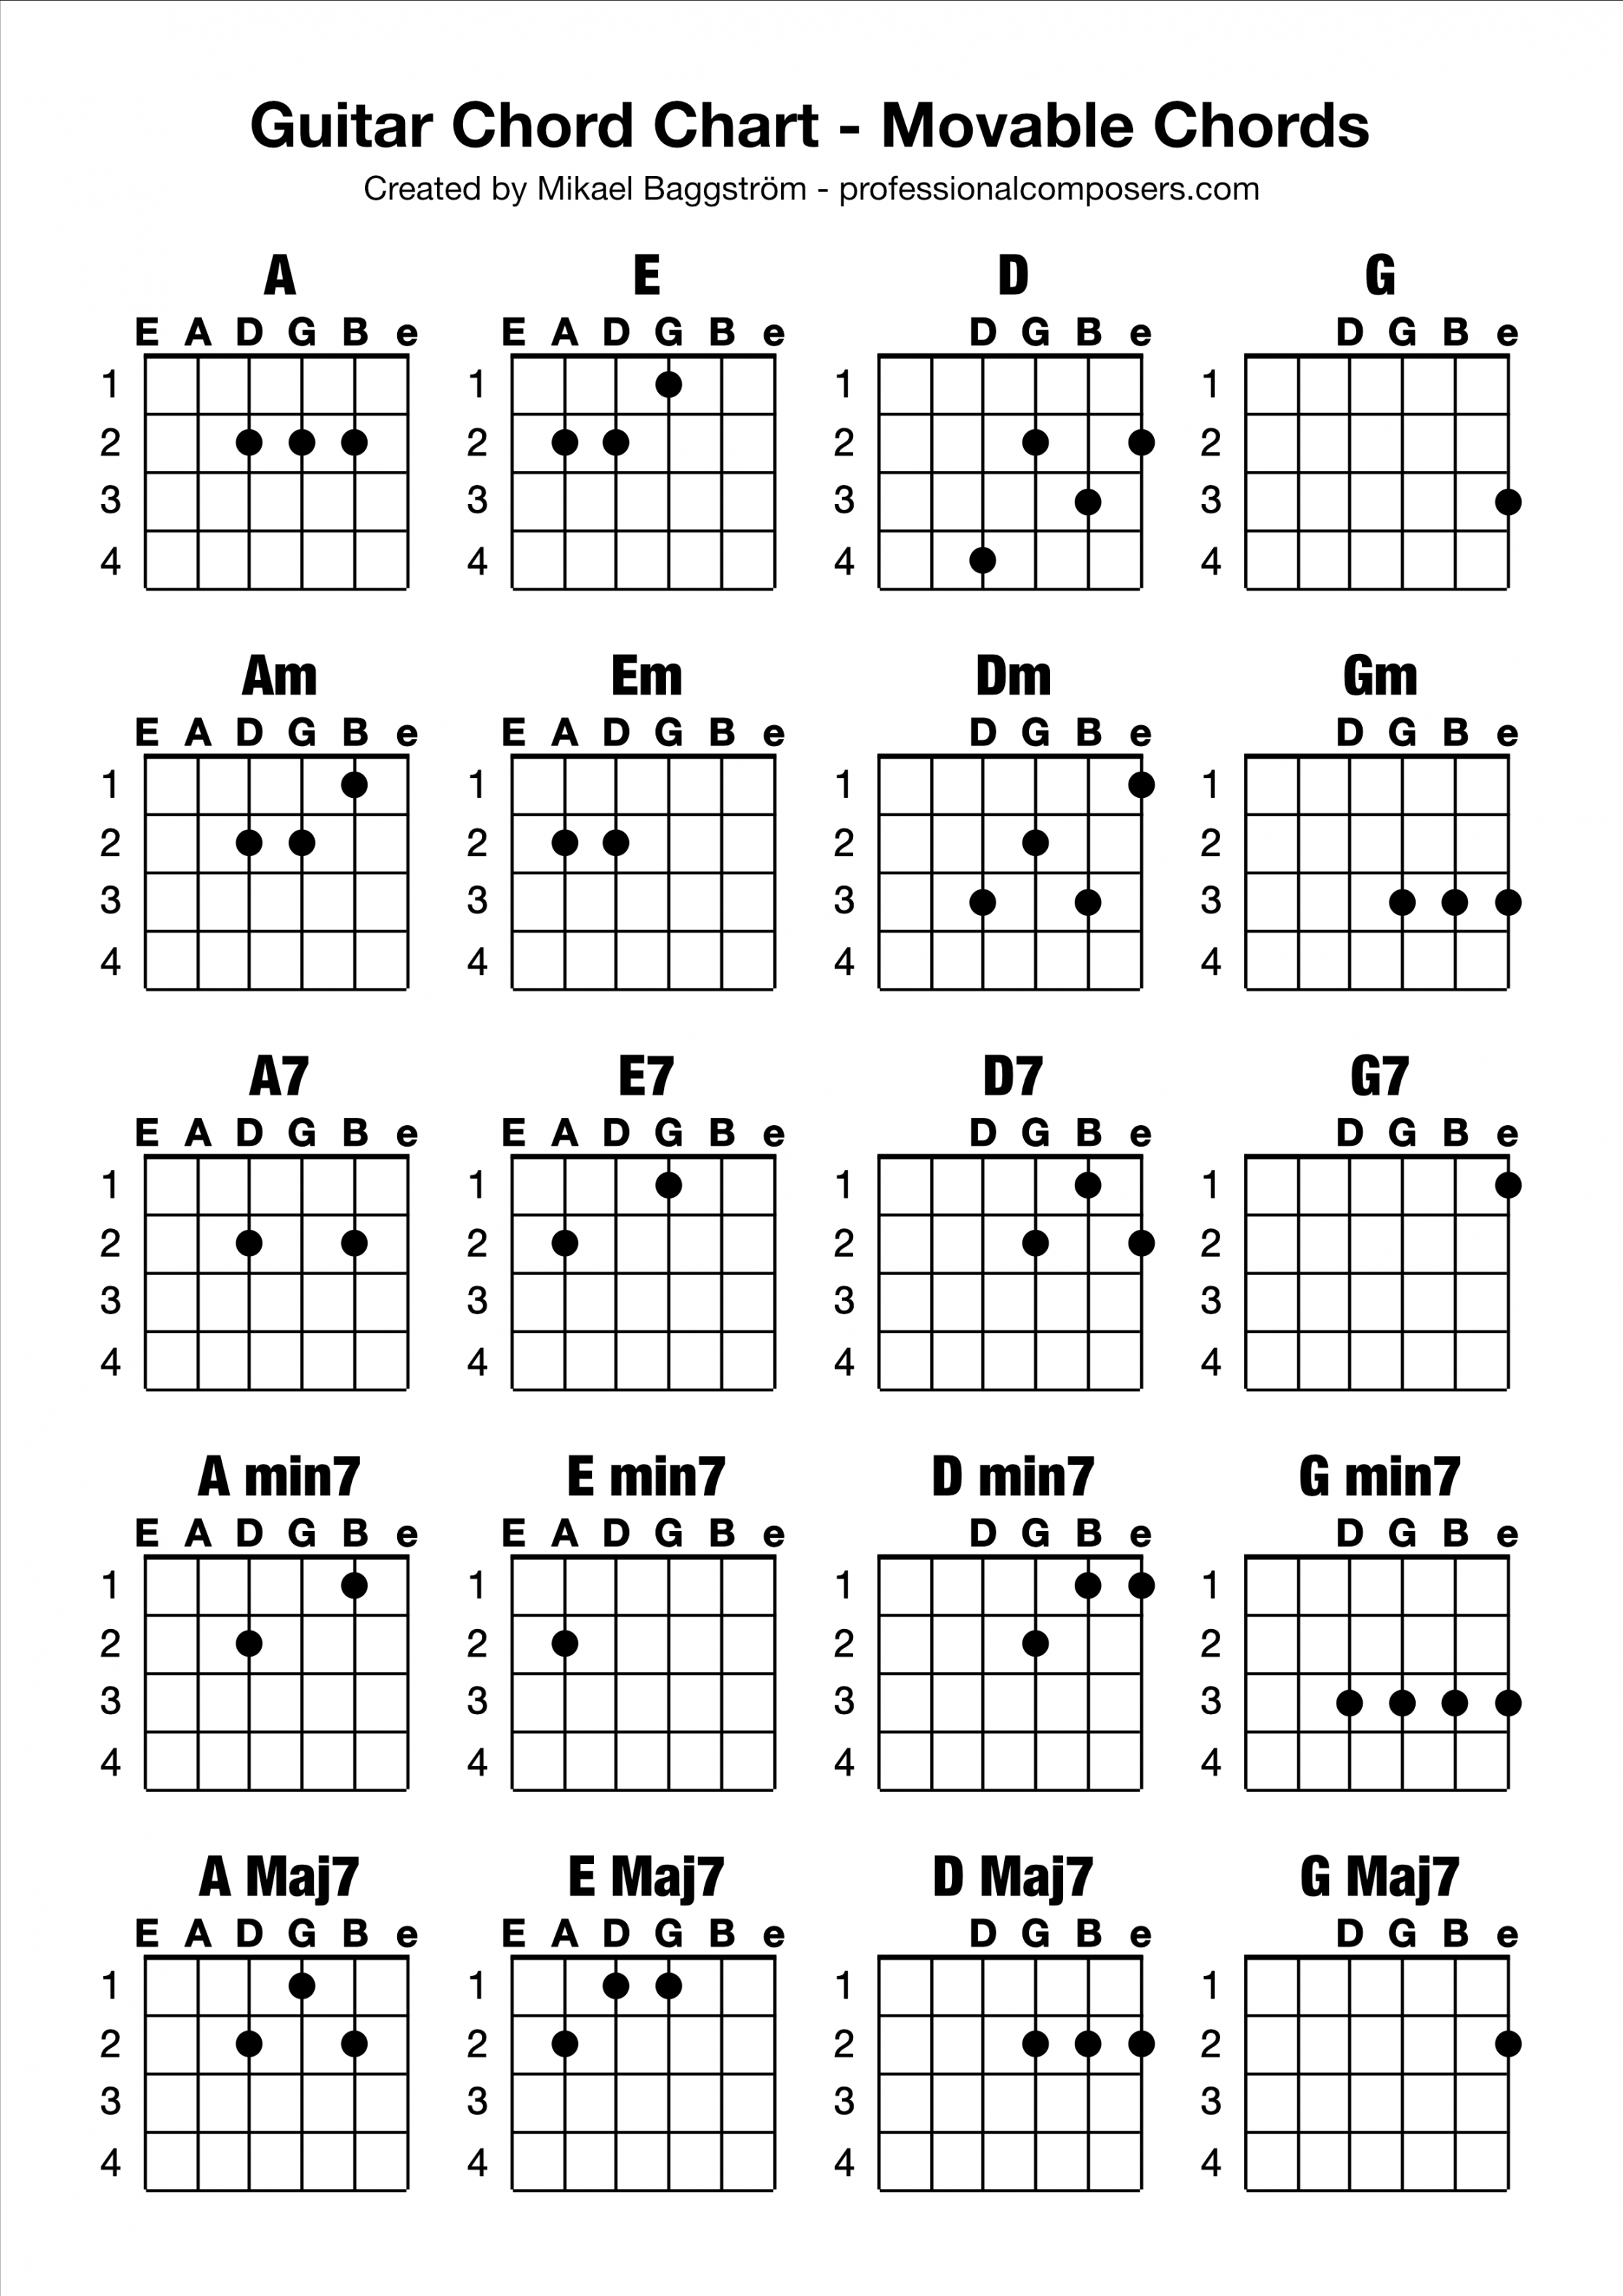 Boost Your Guitar Playing: Free Movable Chord Chart (Printable